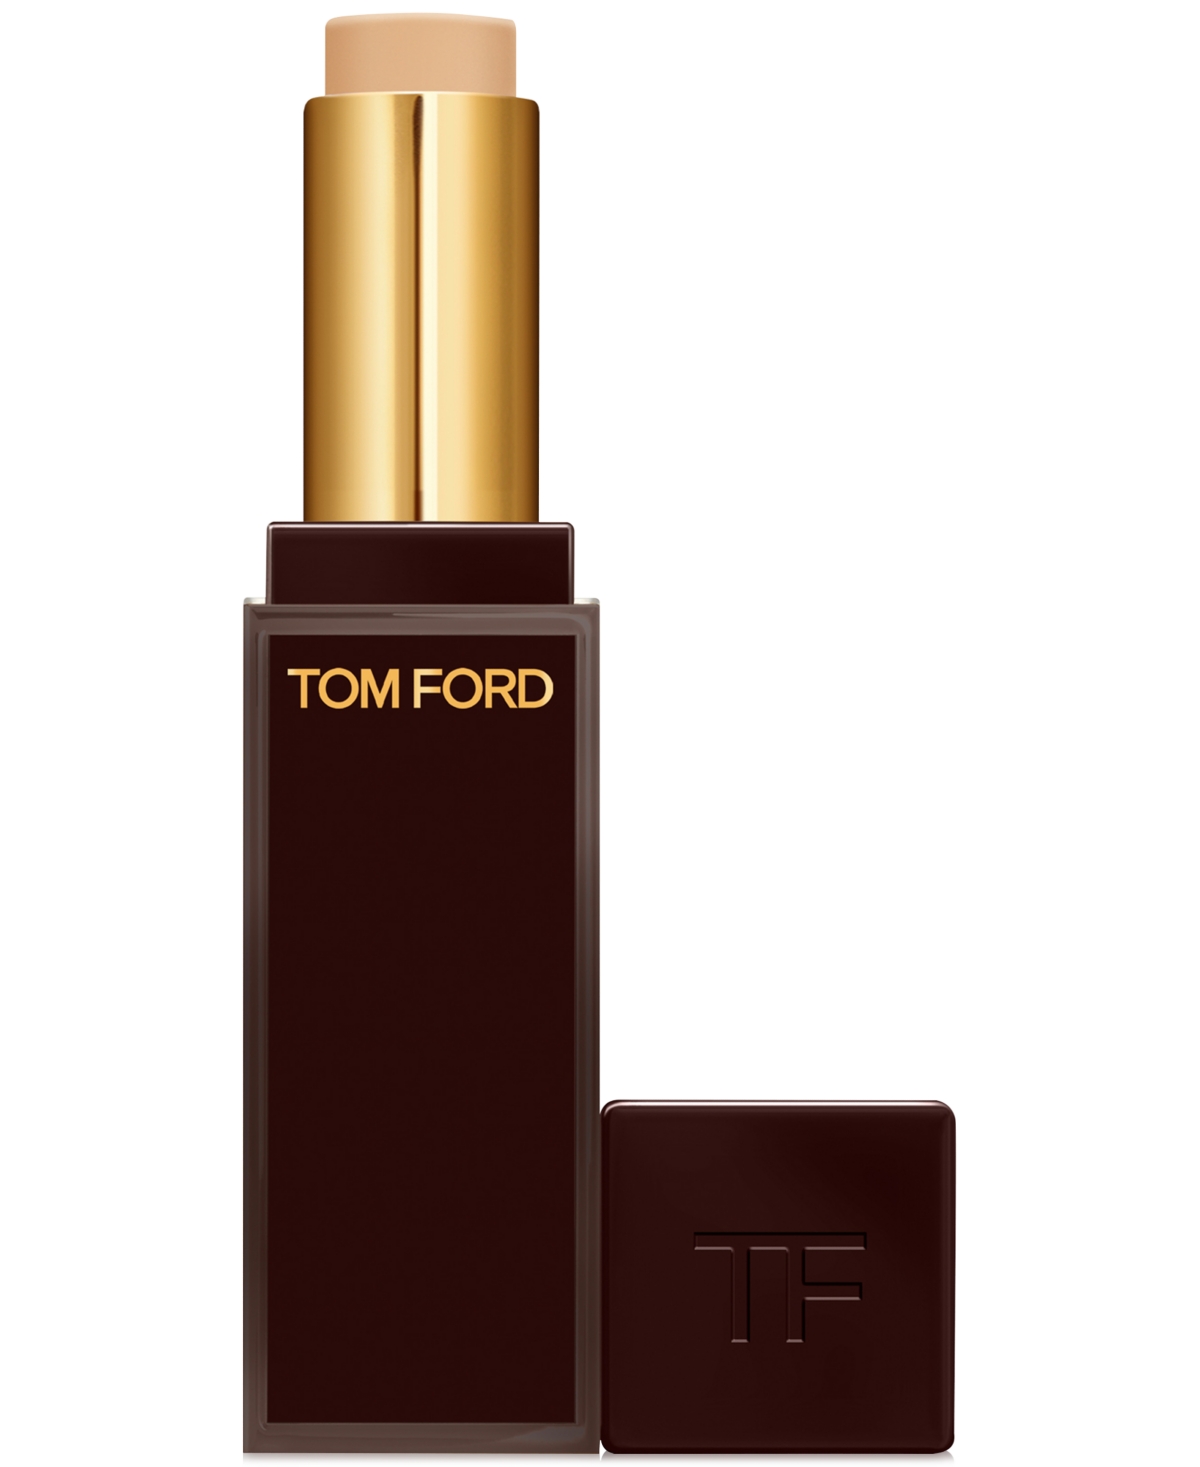 Tom Ford Traceless Soft Matte Concealer In W Beige (light-medium Skin With Yellow U